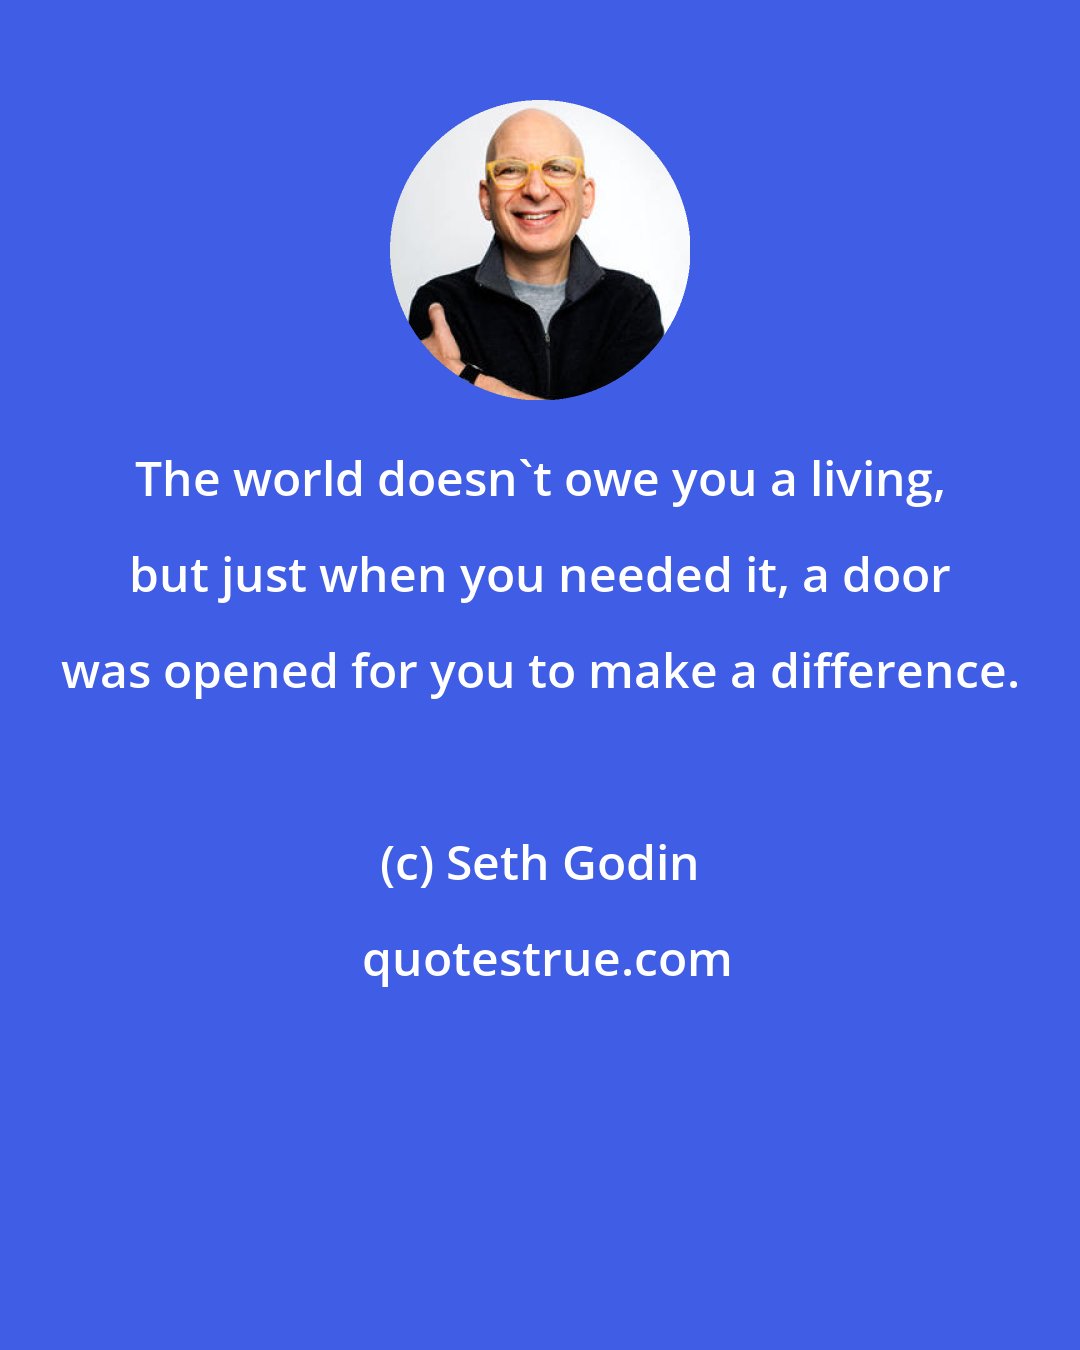 Seth Godin: The world doesn't owe you a living, but just when you needed it, a door was opened for you to make a difference.